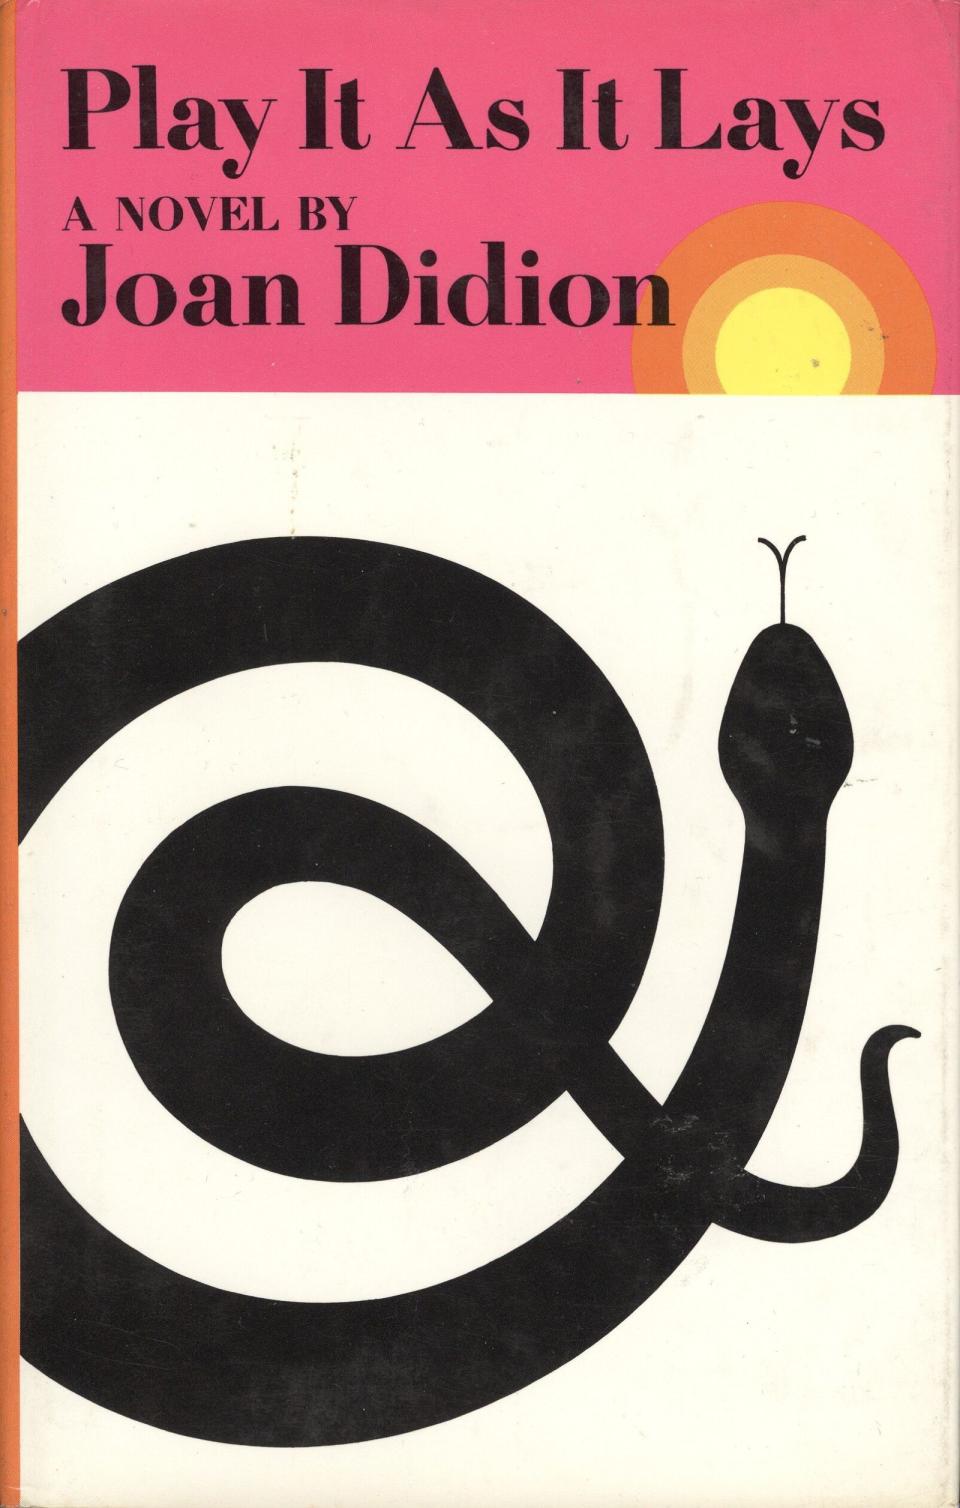 Play It As It Lays, by Joan Didion